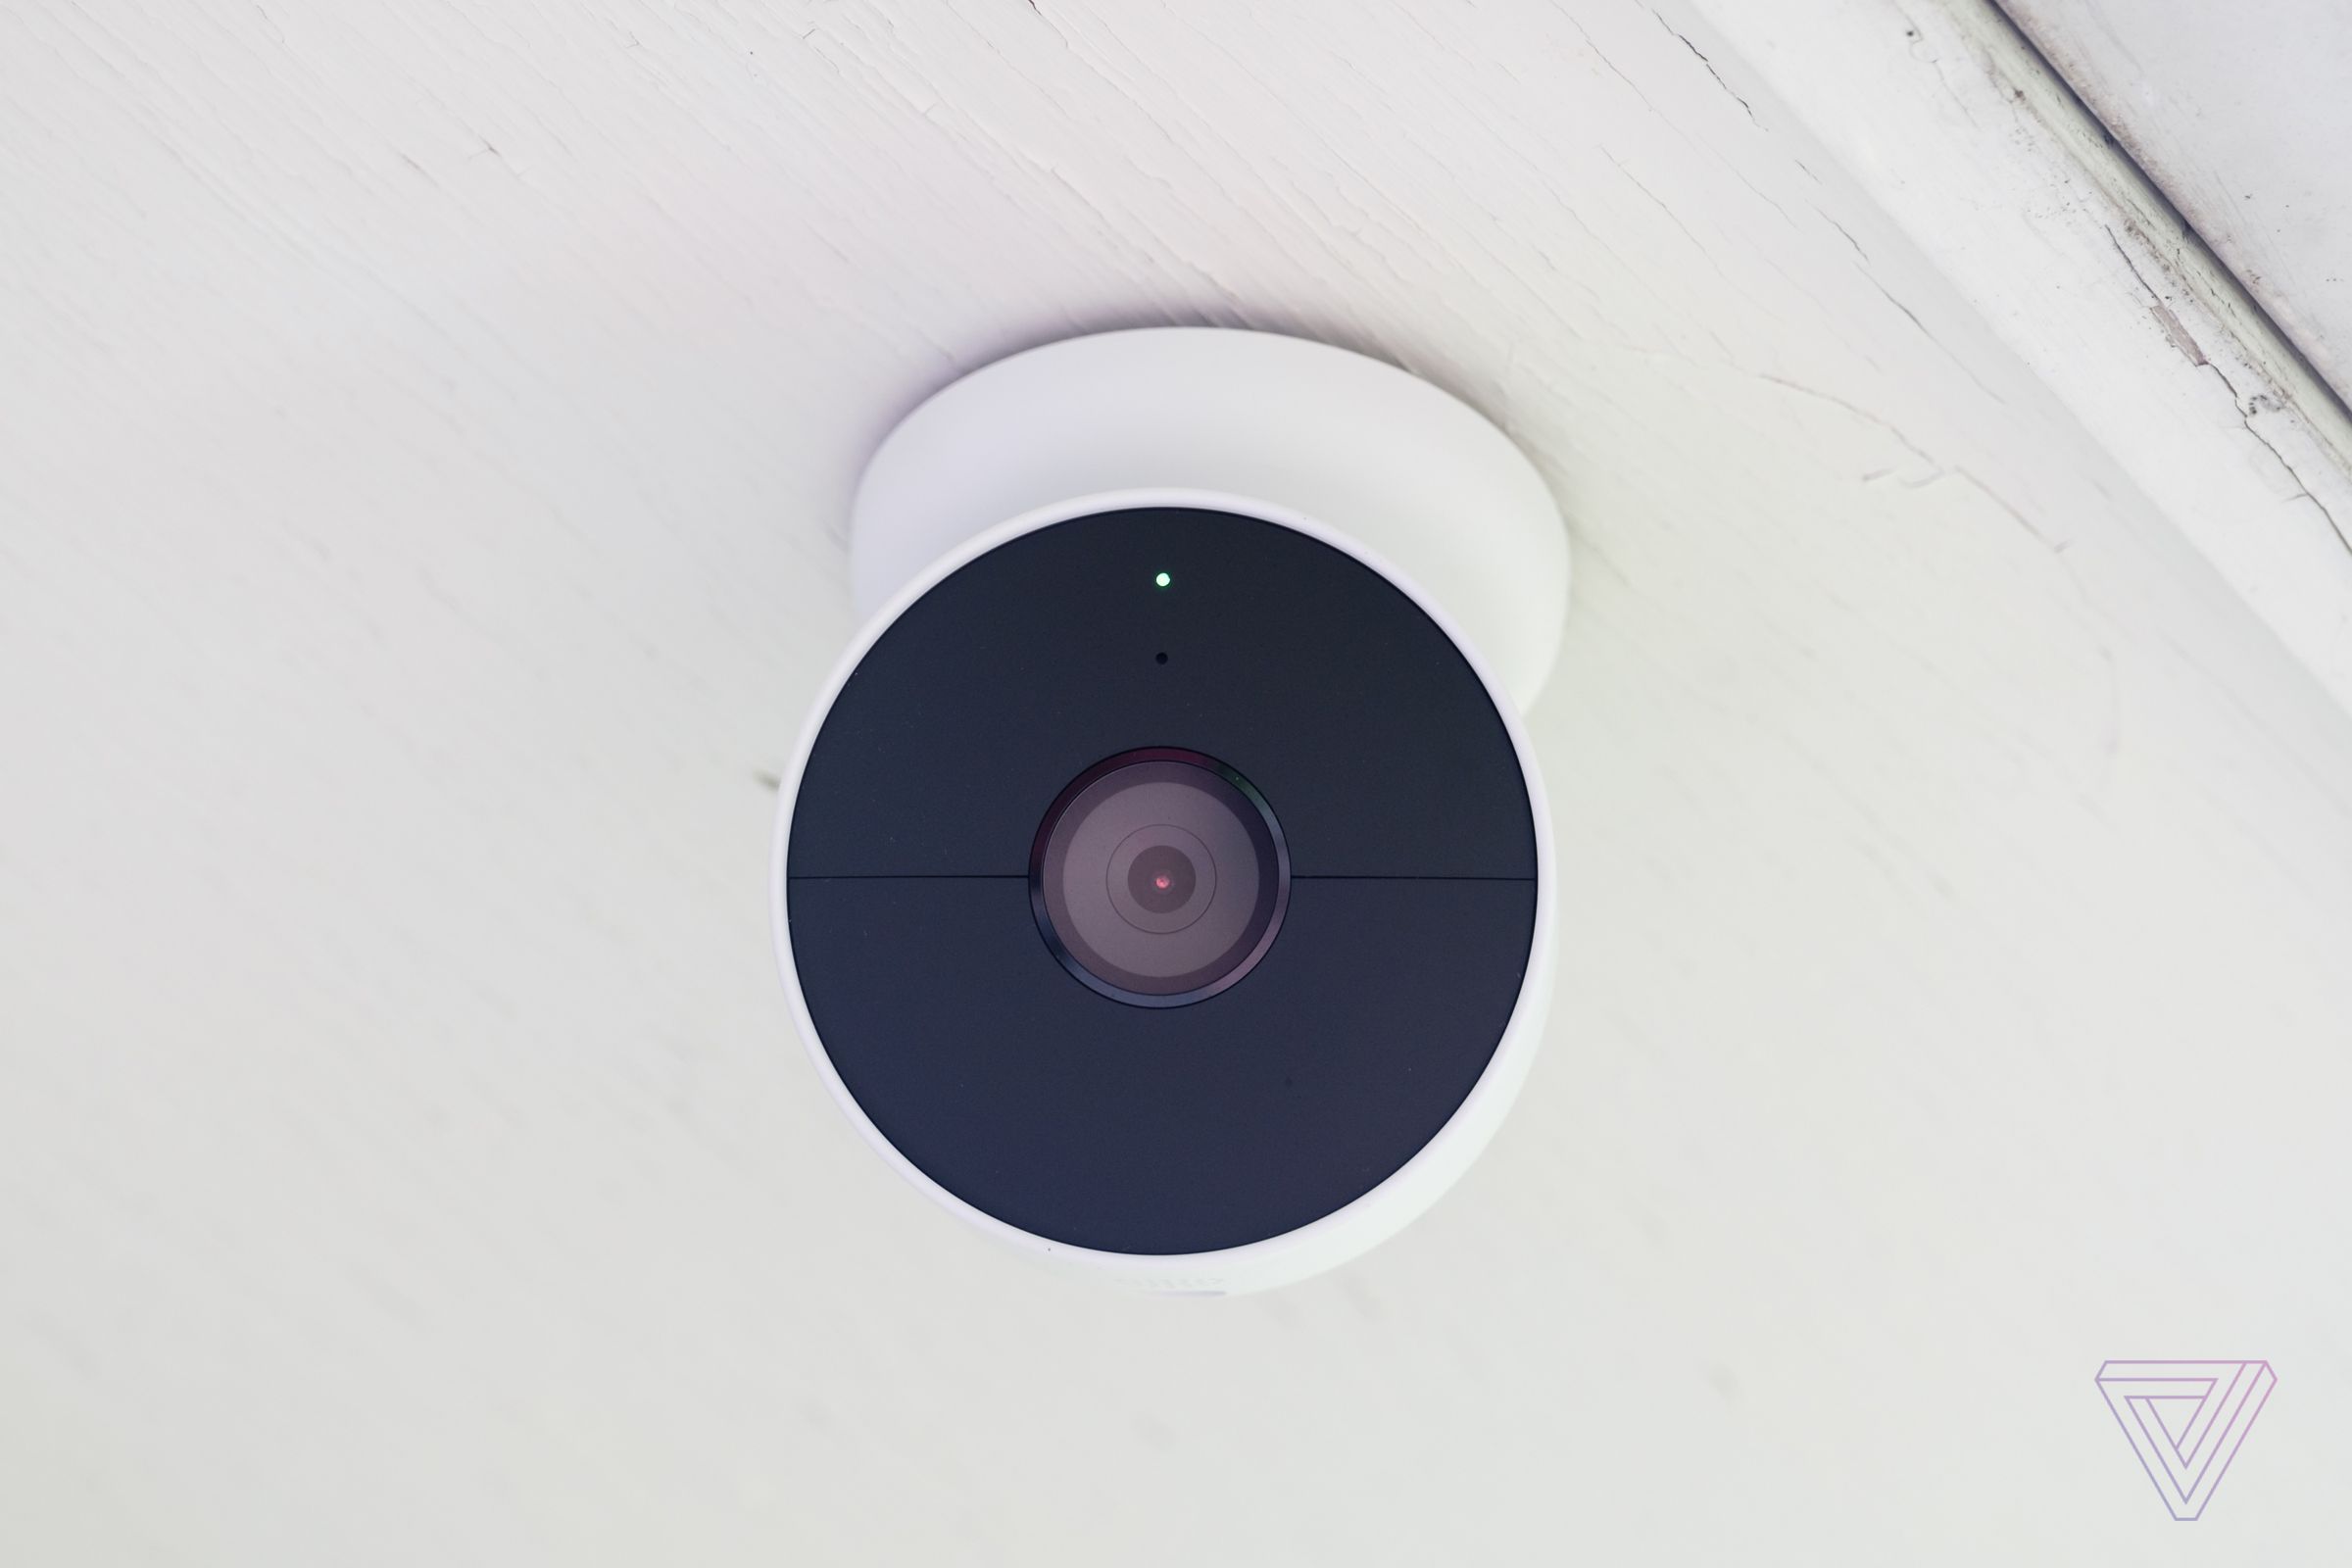 The Google Nest Cam works off battery power or can be wired to a power adaptor. In the latter case, it will continue to stay powered even in lower temps.